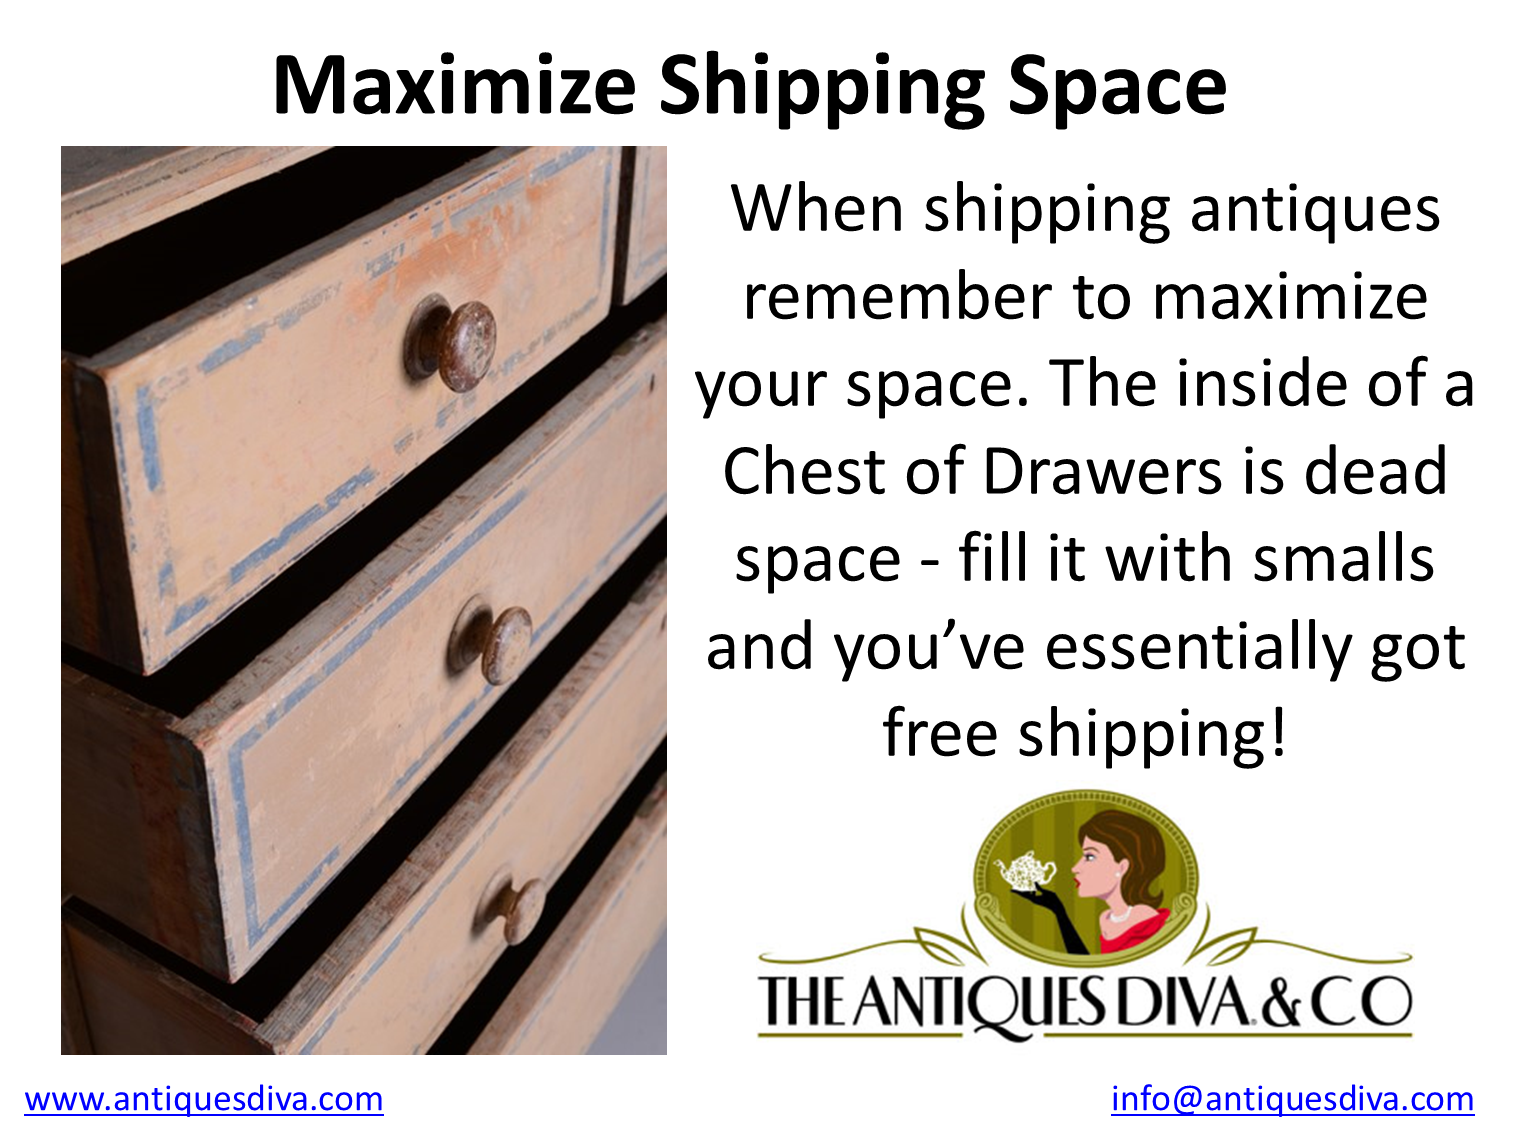 Consolidated shipments, Groupage, Shipping antiques from Europe, Antiques Diva Buying Services, How do I ship antiques from Europe